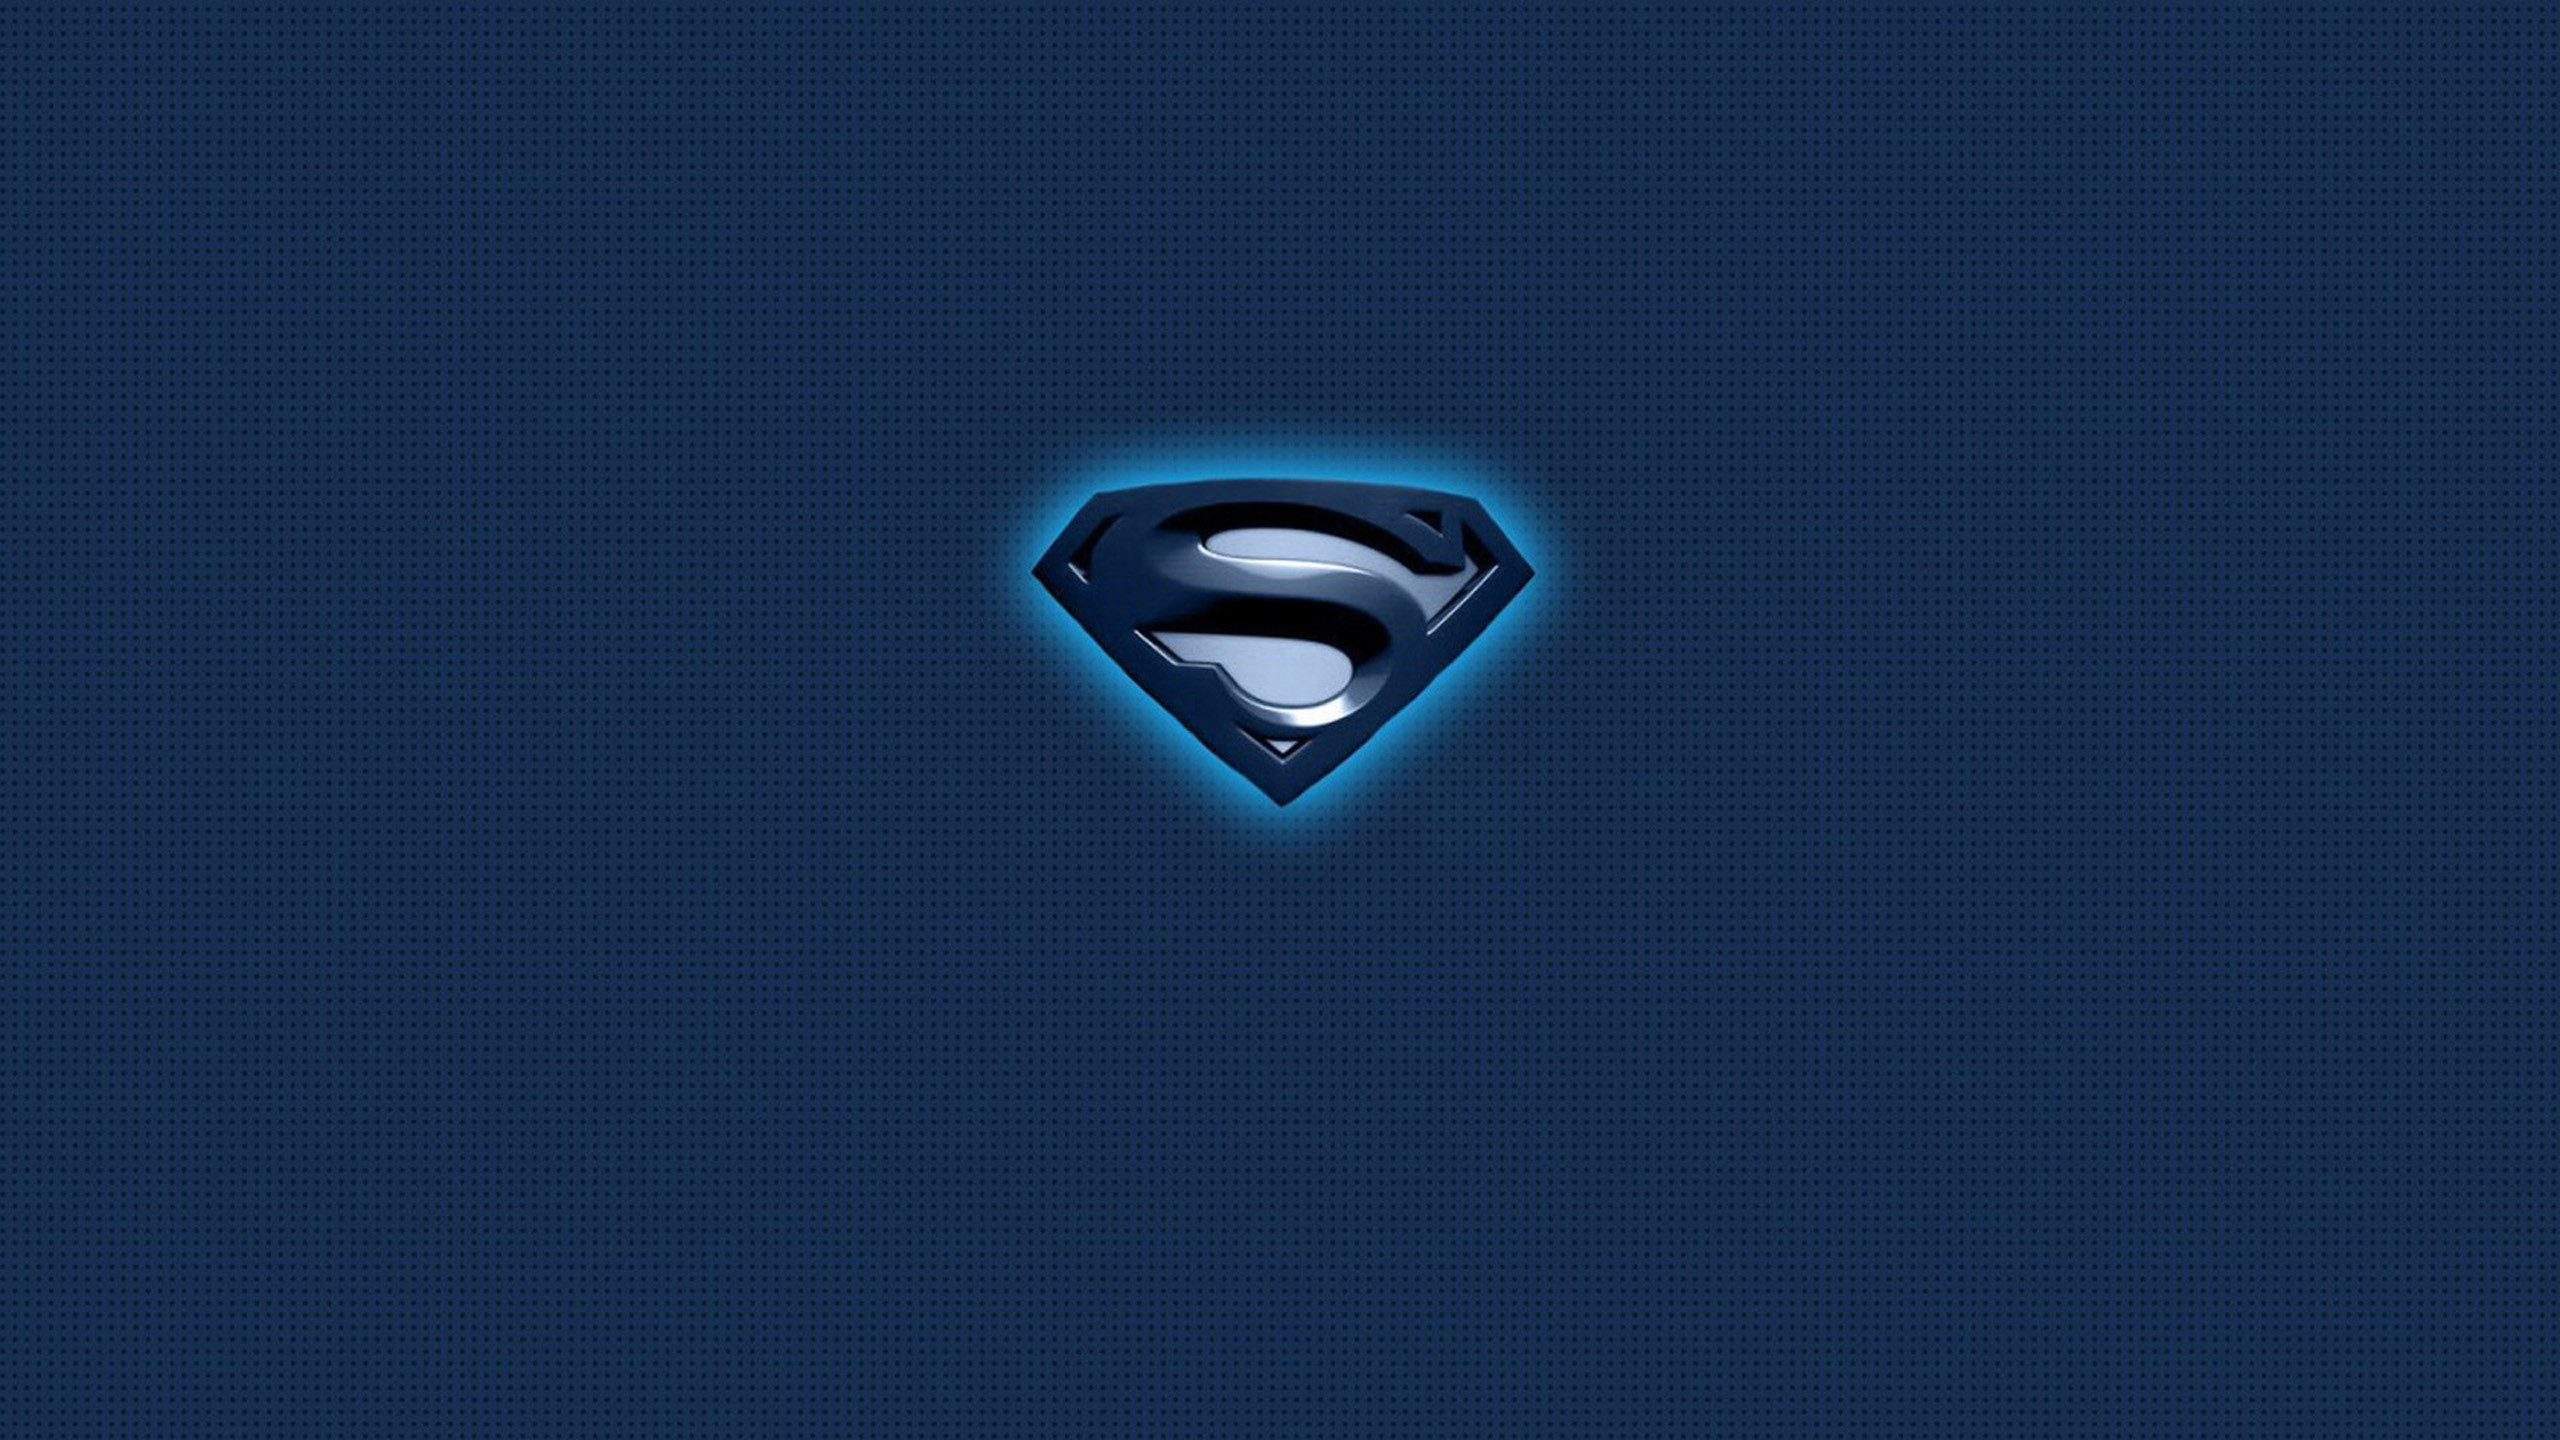 2560x1440 free superman logo ipad image hd wallpapers background photos windows mac  wallpapers tablet high definition samsung wallpapers wallpaper for iphone  ...